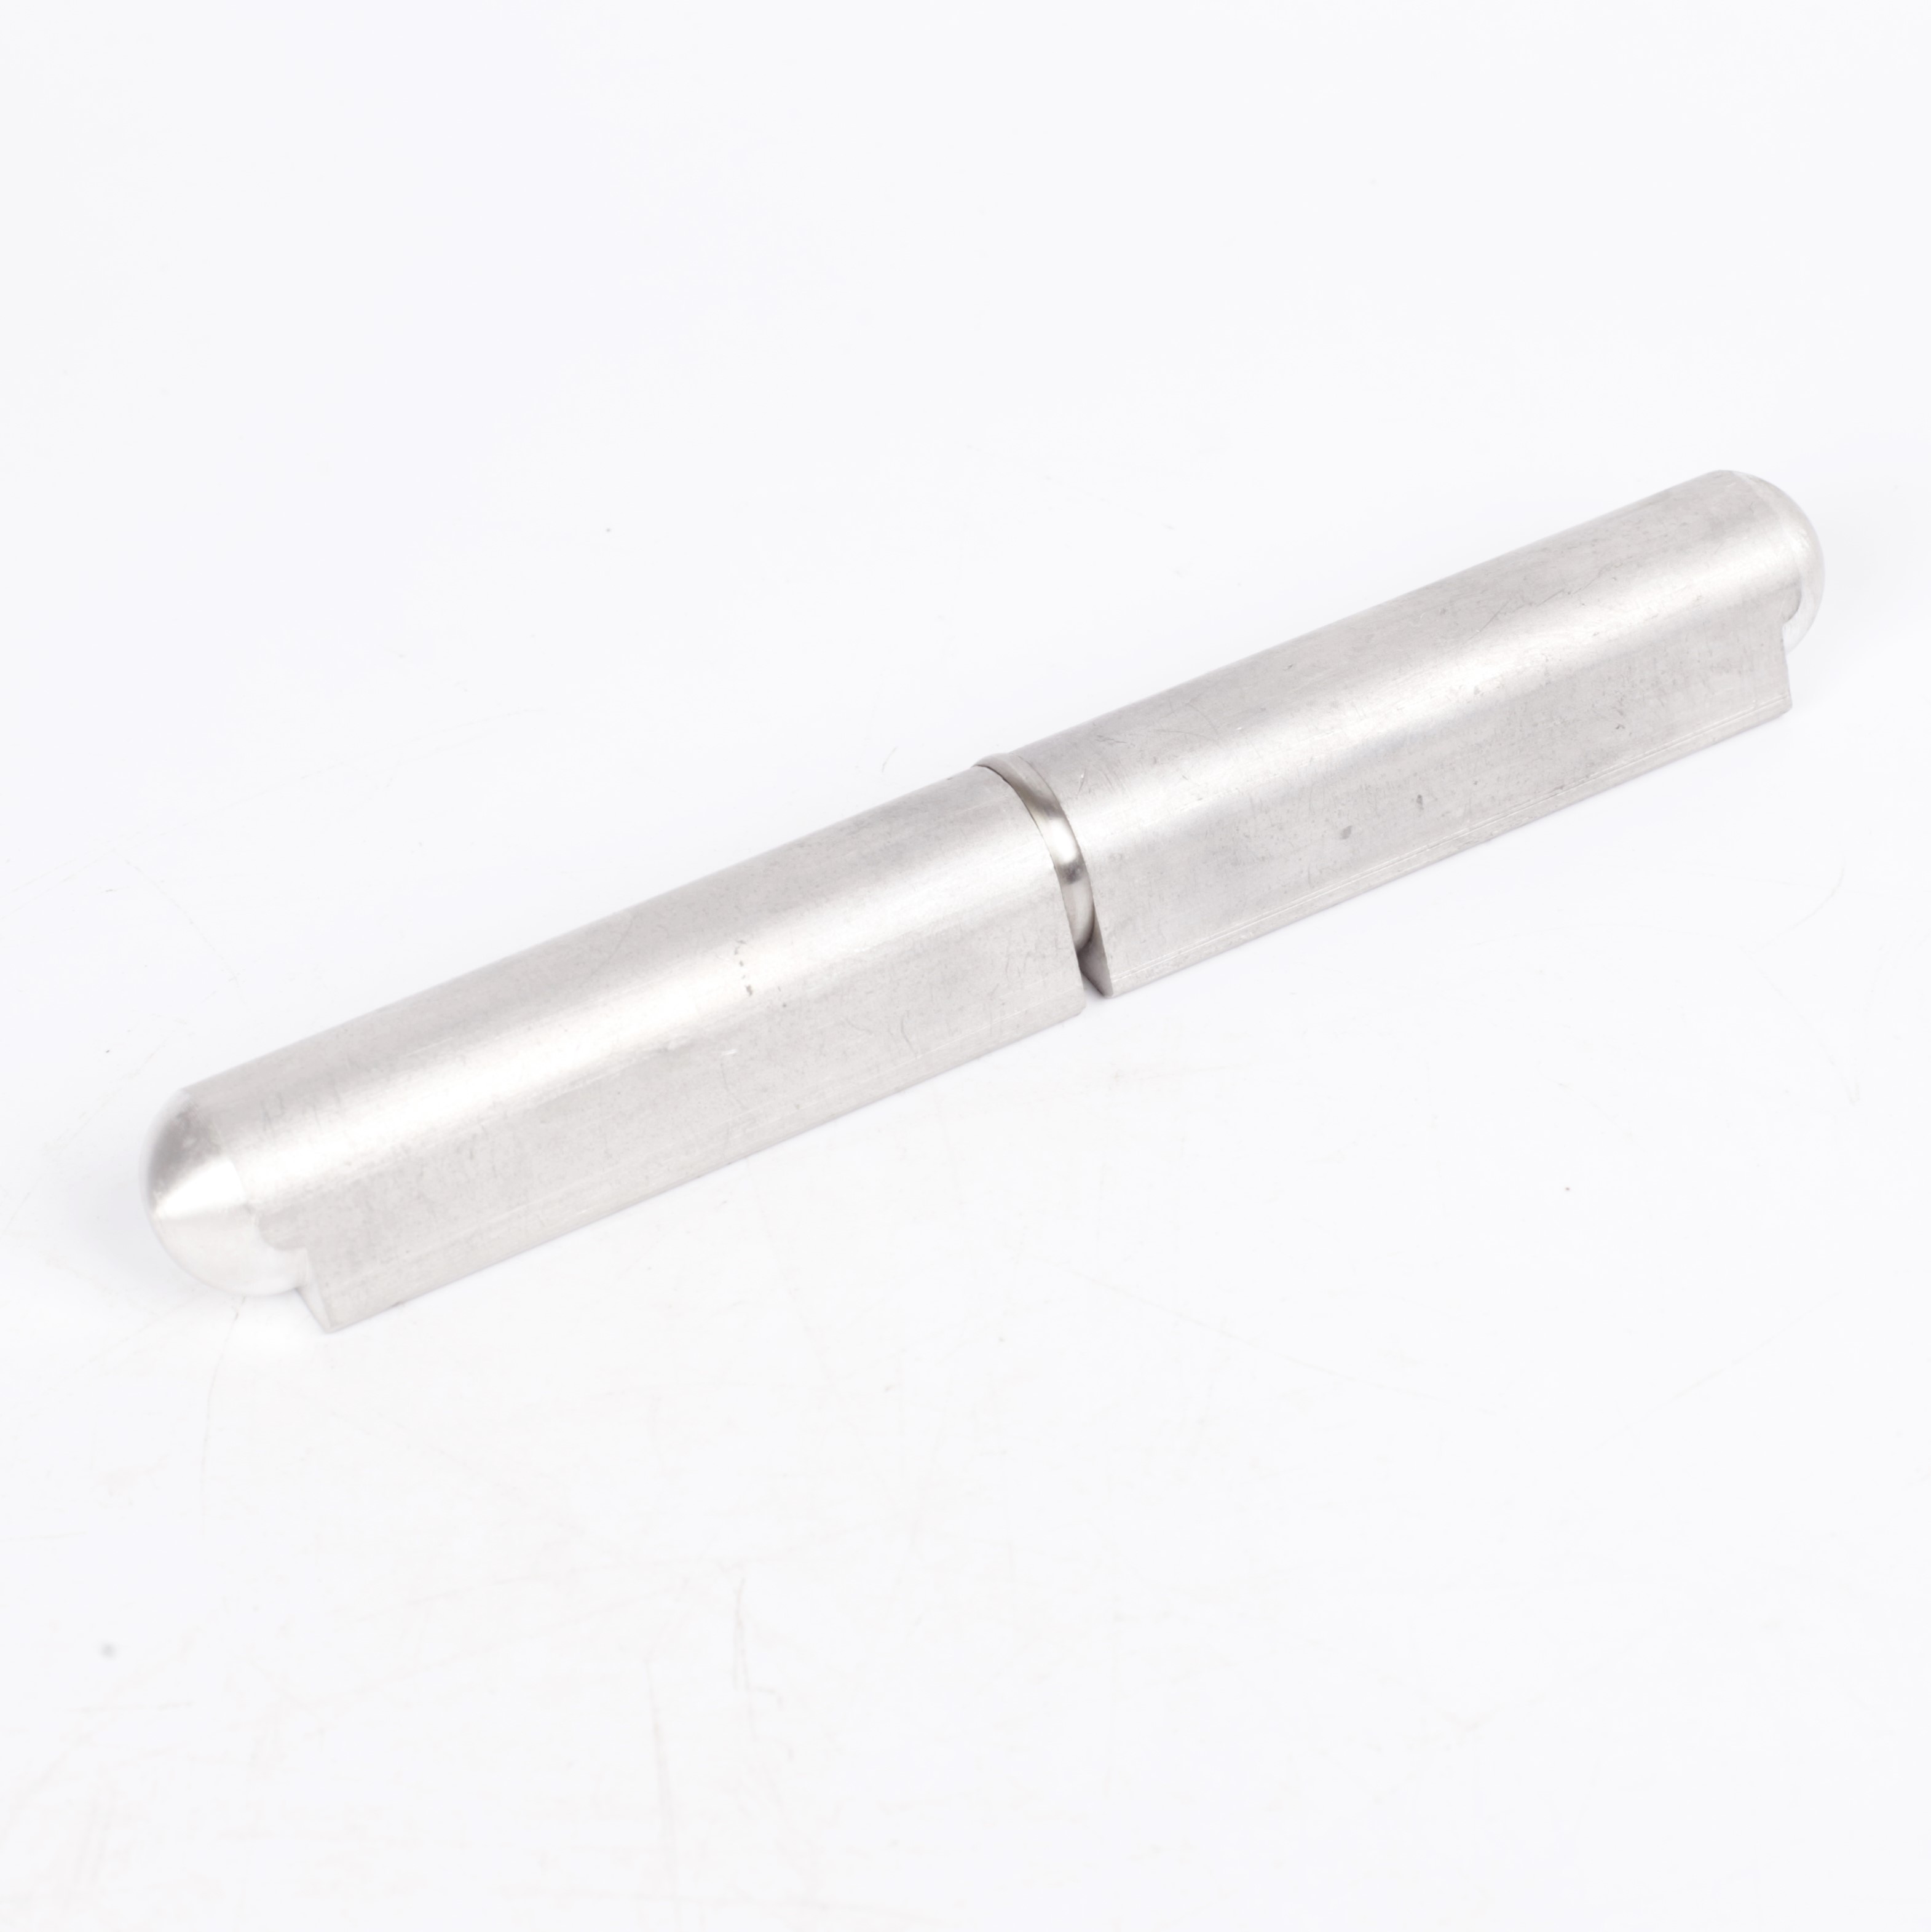 Aluminum Material Bullet Hinges without Grease Zerk